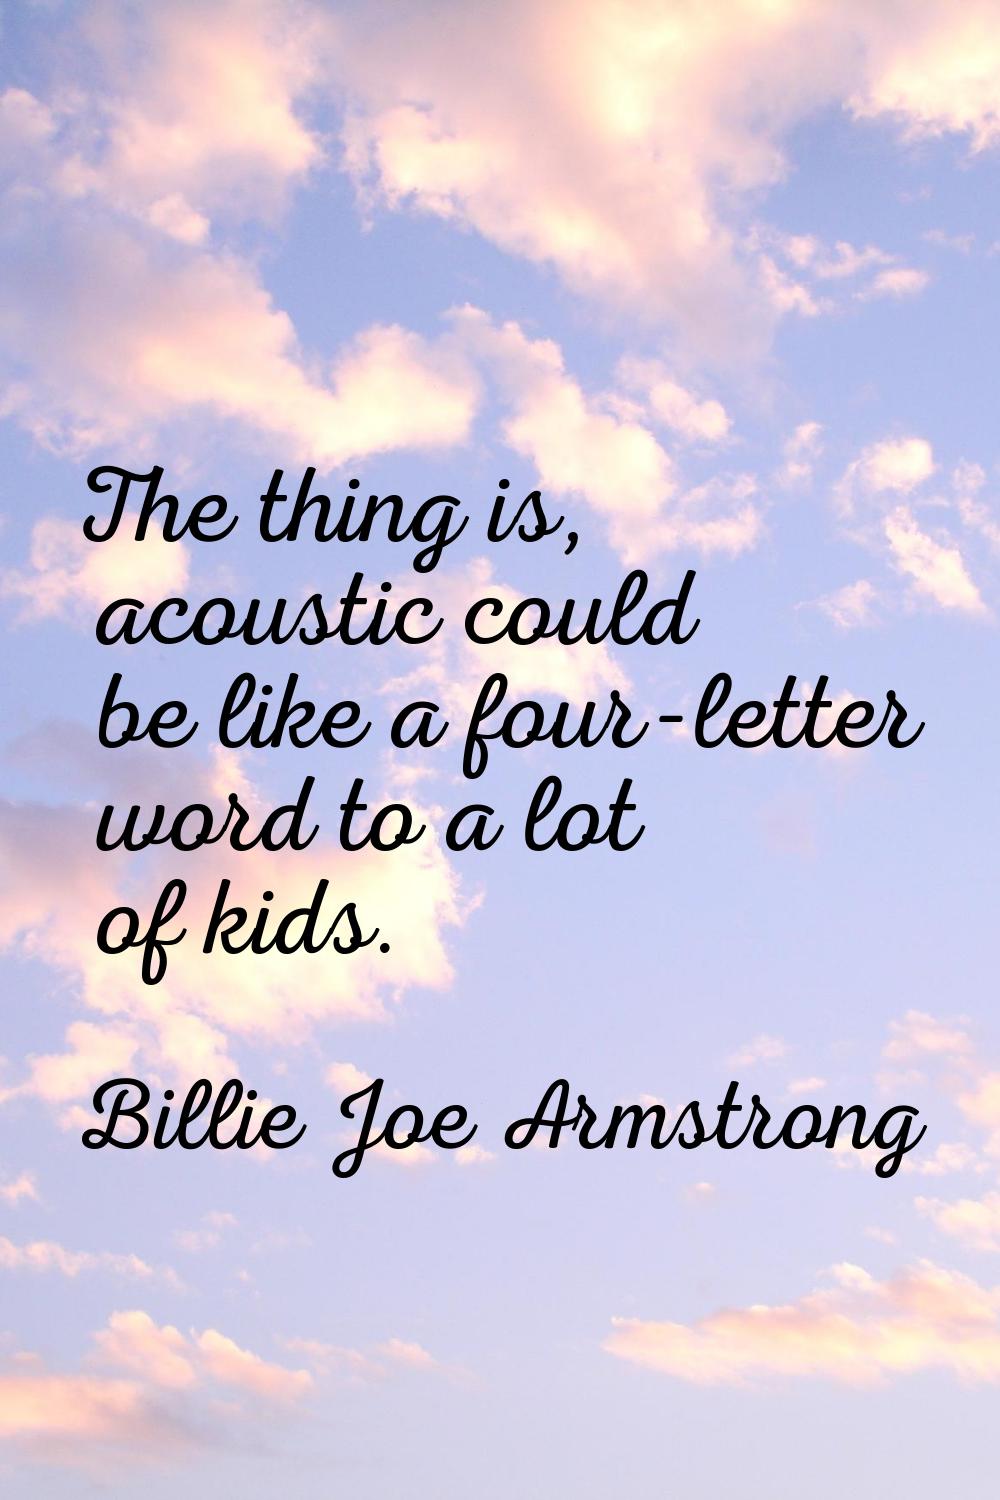 The thing is, acoustic could be like a four-letter word to a lot of kids.